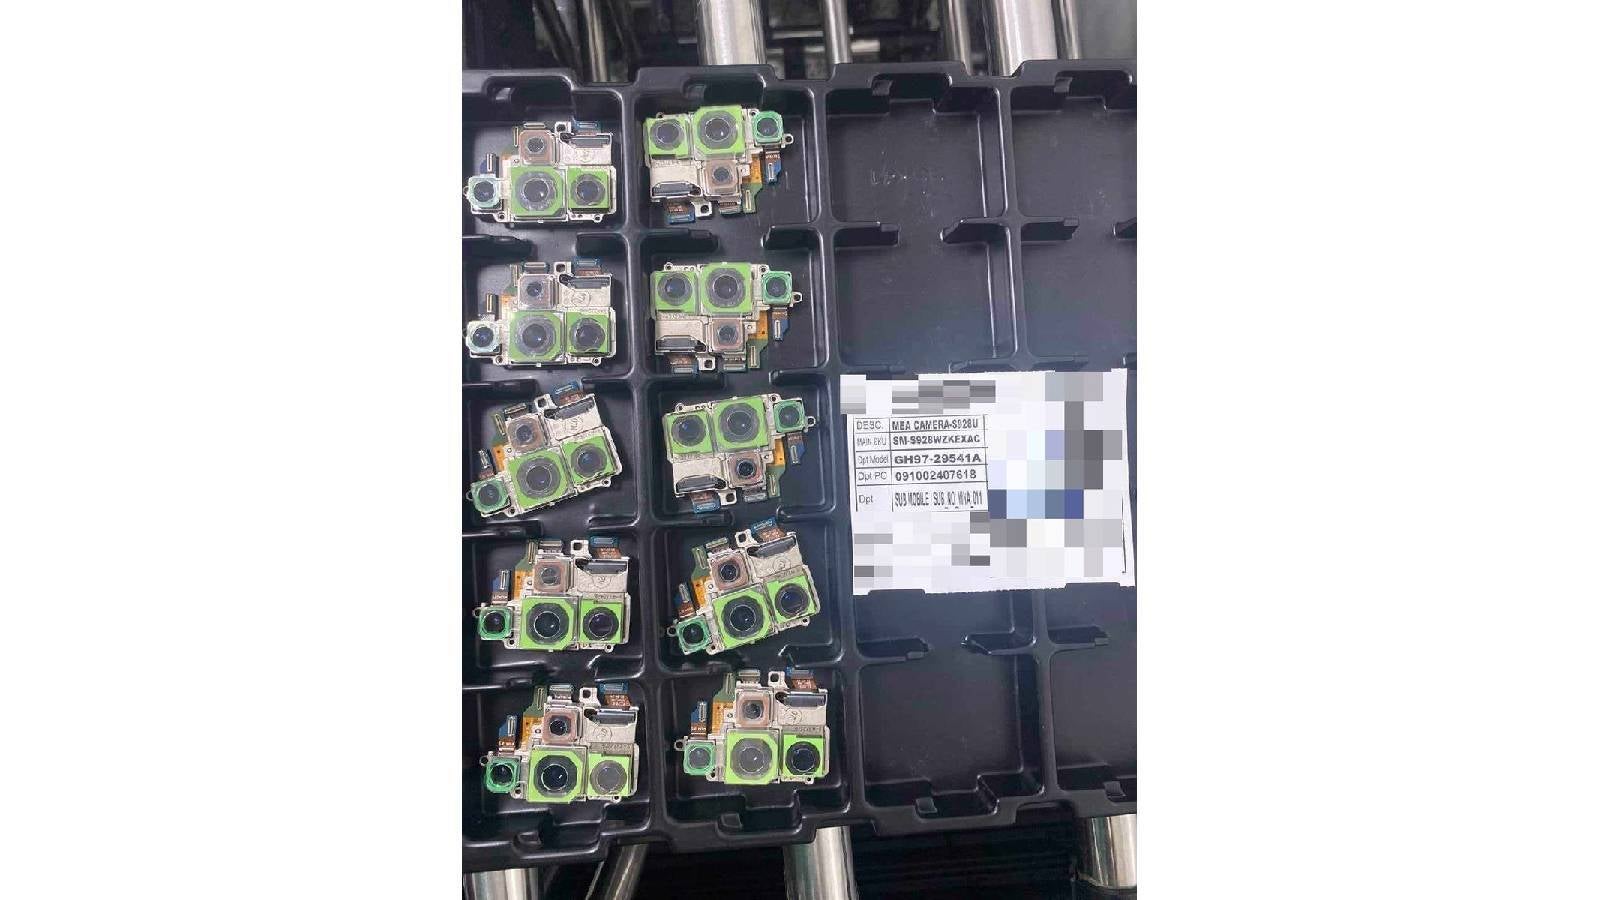 Image Likely Taken at a Factory Shows Galaxy S24 Ultra's Camera Array – Galaxy S24 Ultra Factory Leak Appears to Confirm Worst Suspicions About Phone